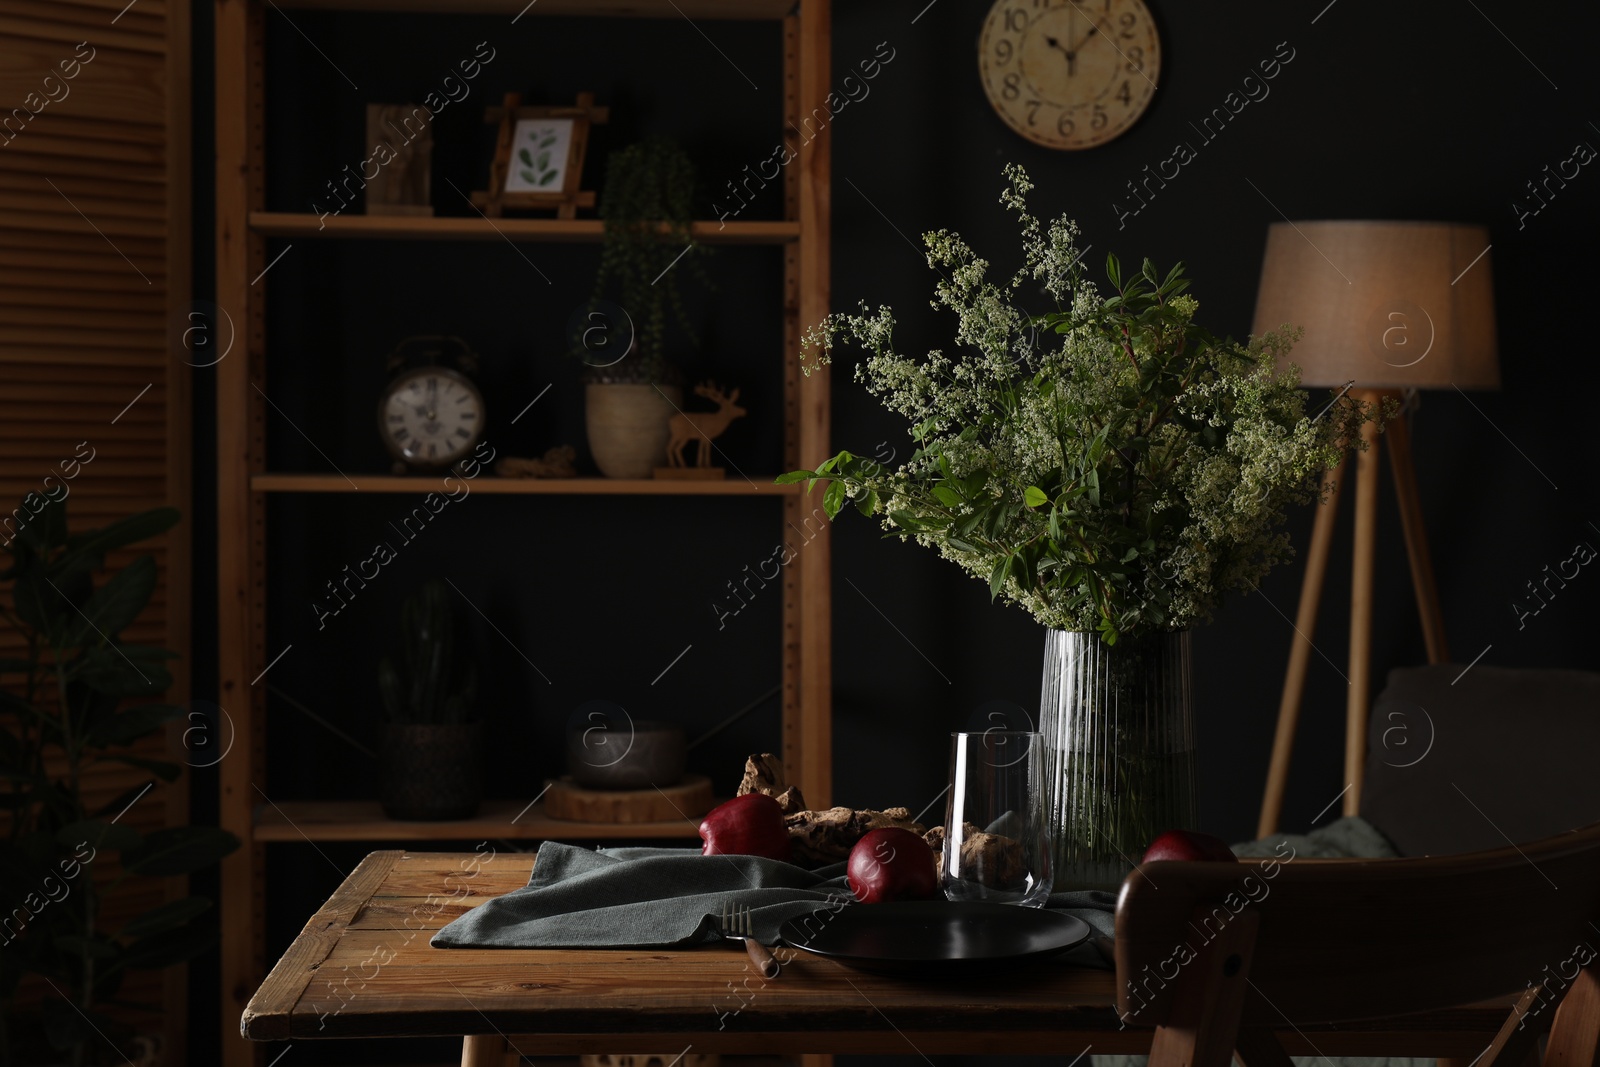 Photo of Set of clean dishware, ripe red apples and flowers on wooden table in stylish dining room